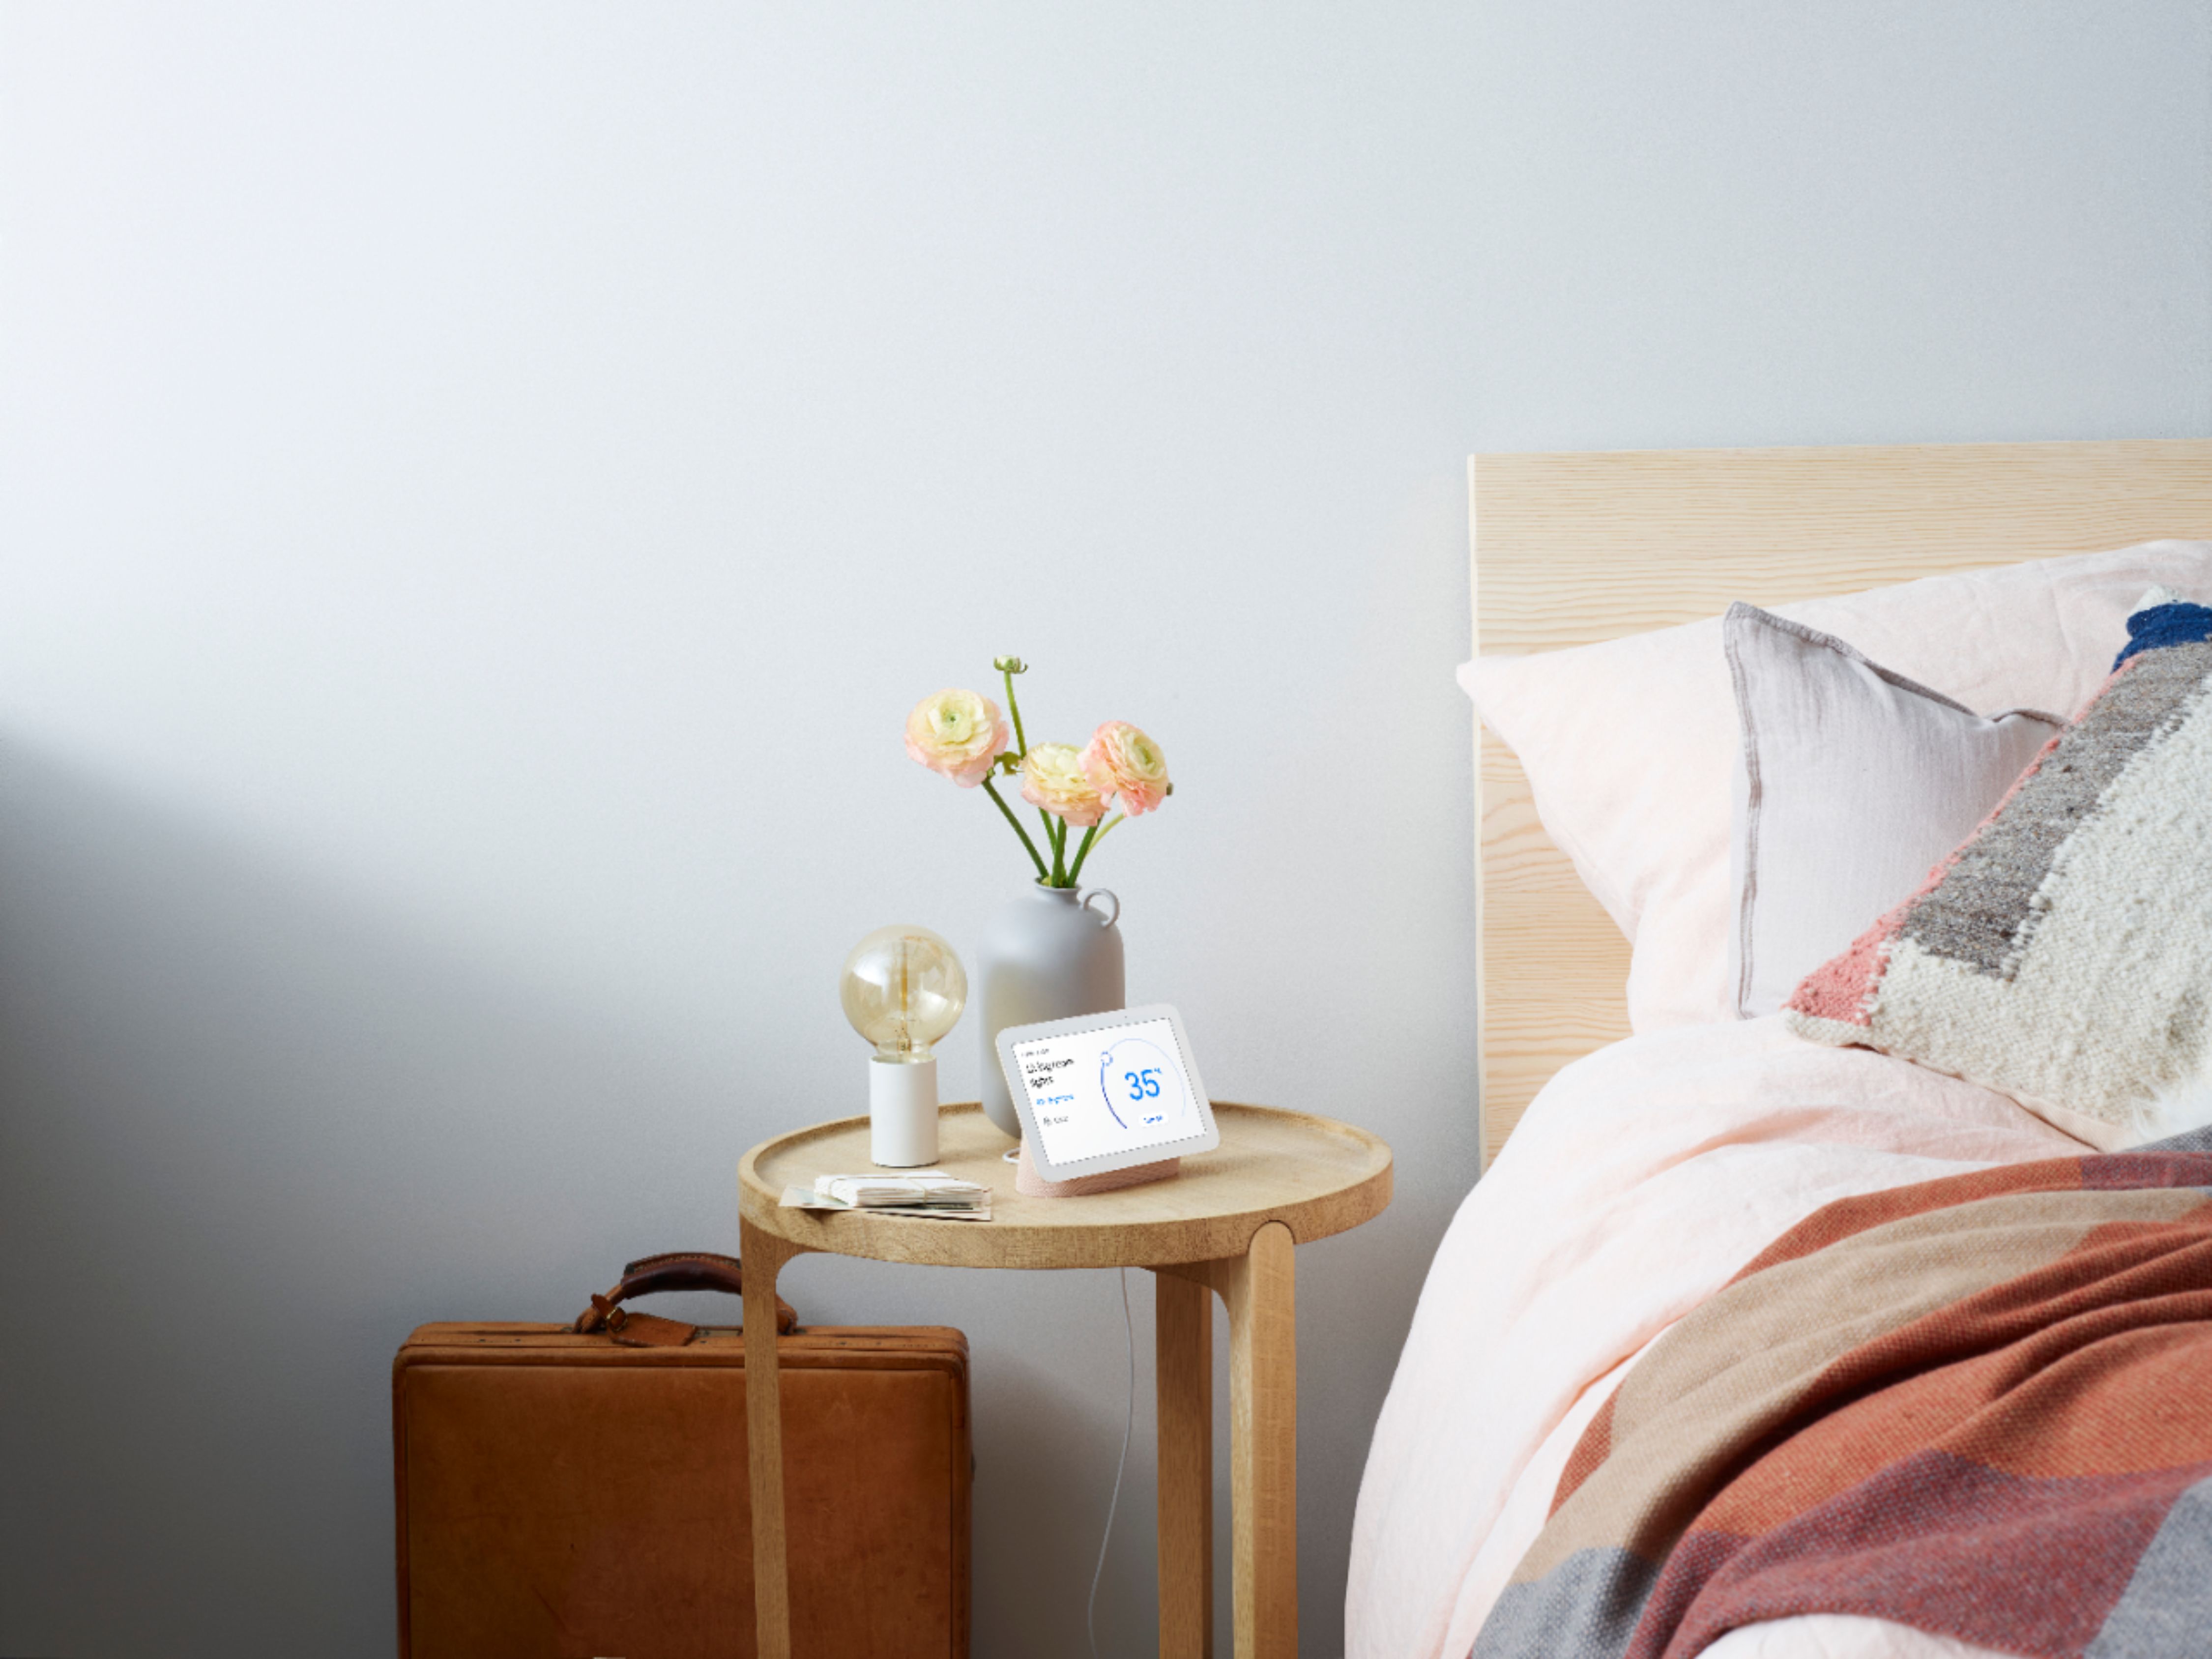 Google Nest Hub (2nd Gen) Review: Camera-Free Smart Display for the Bedroom